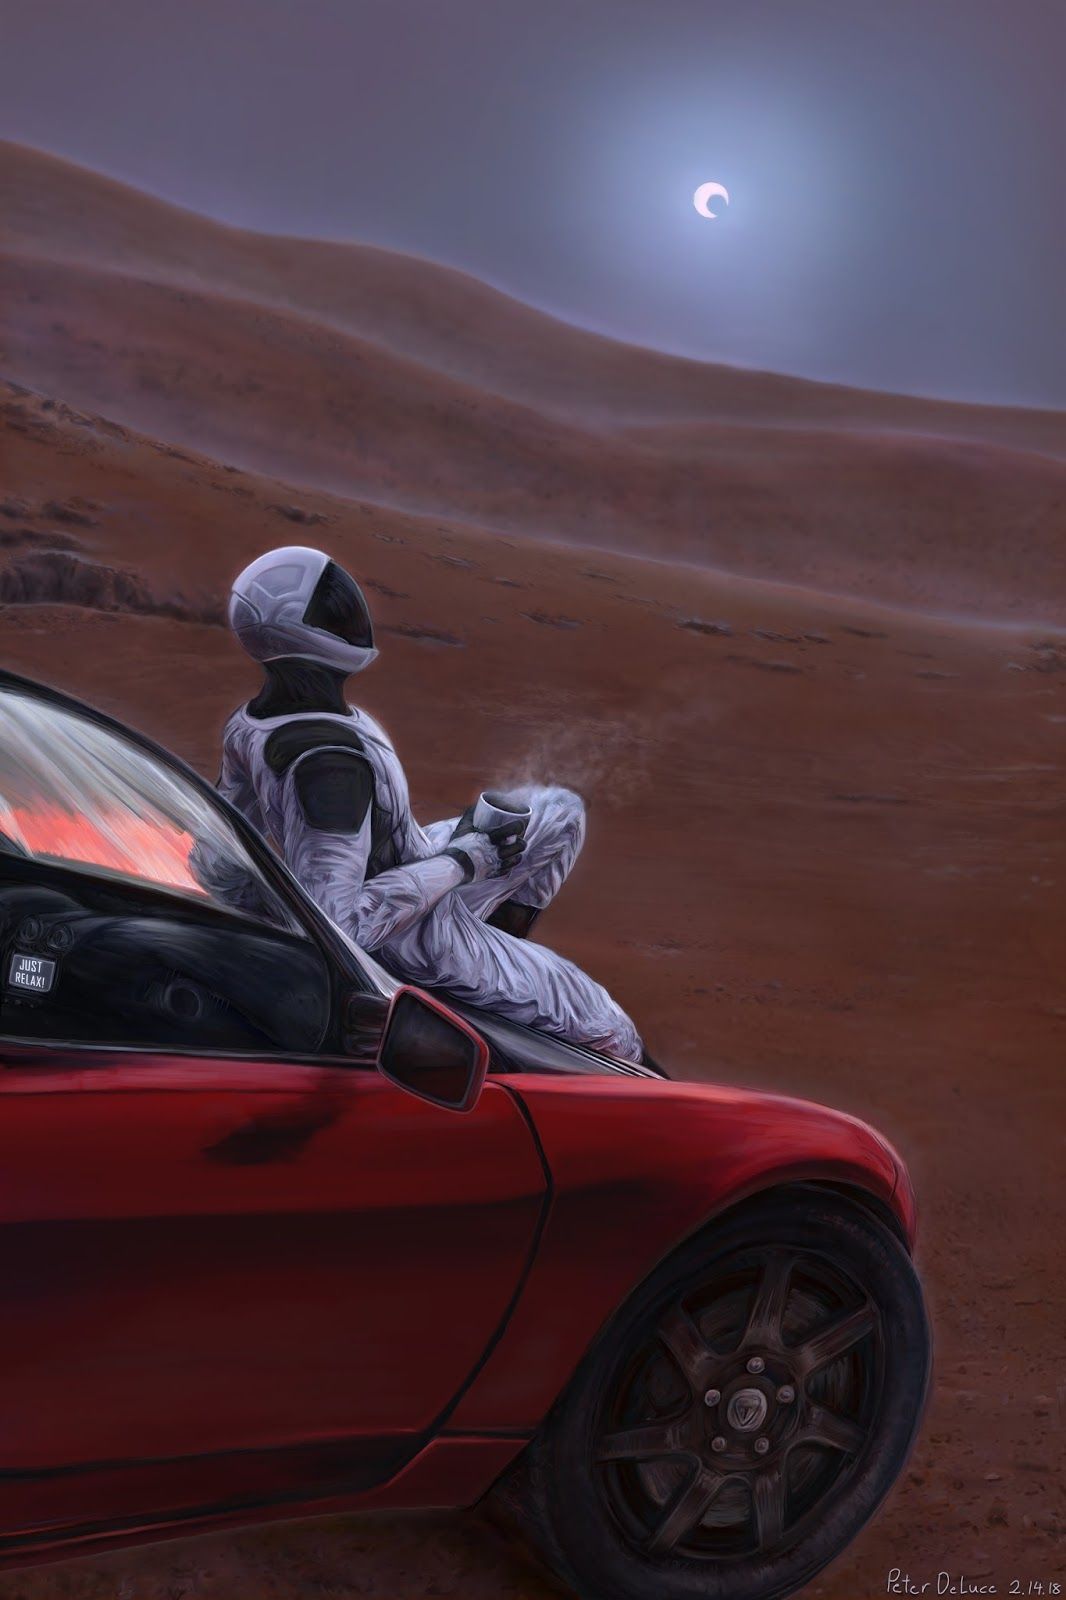 Starman on Mars by Peter DeLuce. Elon musk, Red planet, Tesla